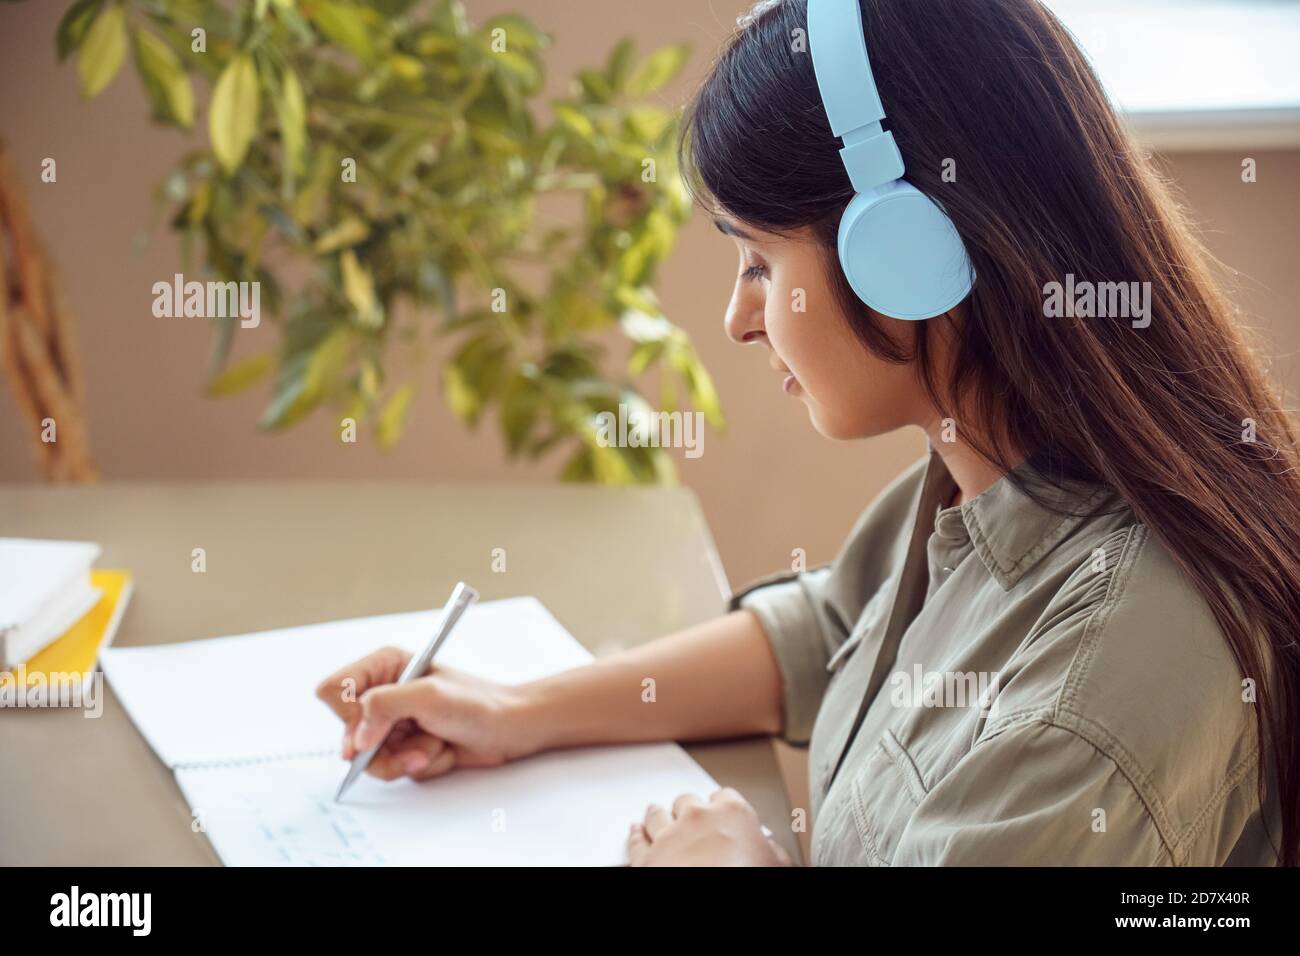 Indian woman student wearing headphones writing listening audio course at home. Stock Photo